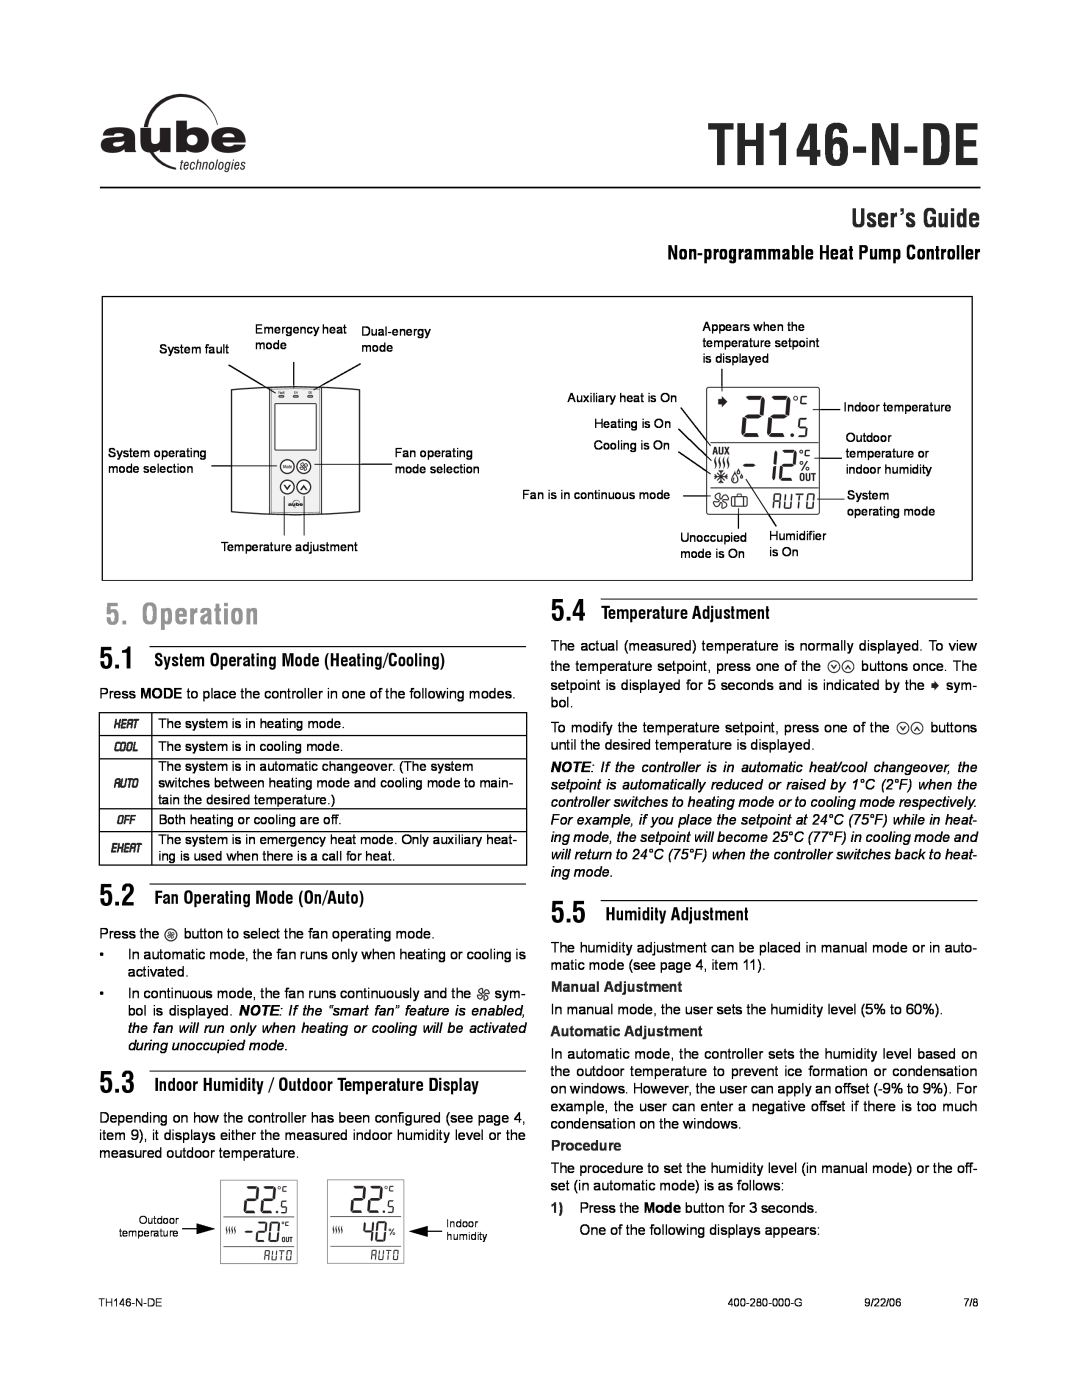 Aube Technologies TH146-N-DE Operation, User’s Guide, System Operating Mode Heating/Cooling, Fan Operating Mode On/Auto 